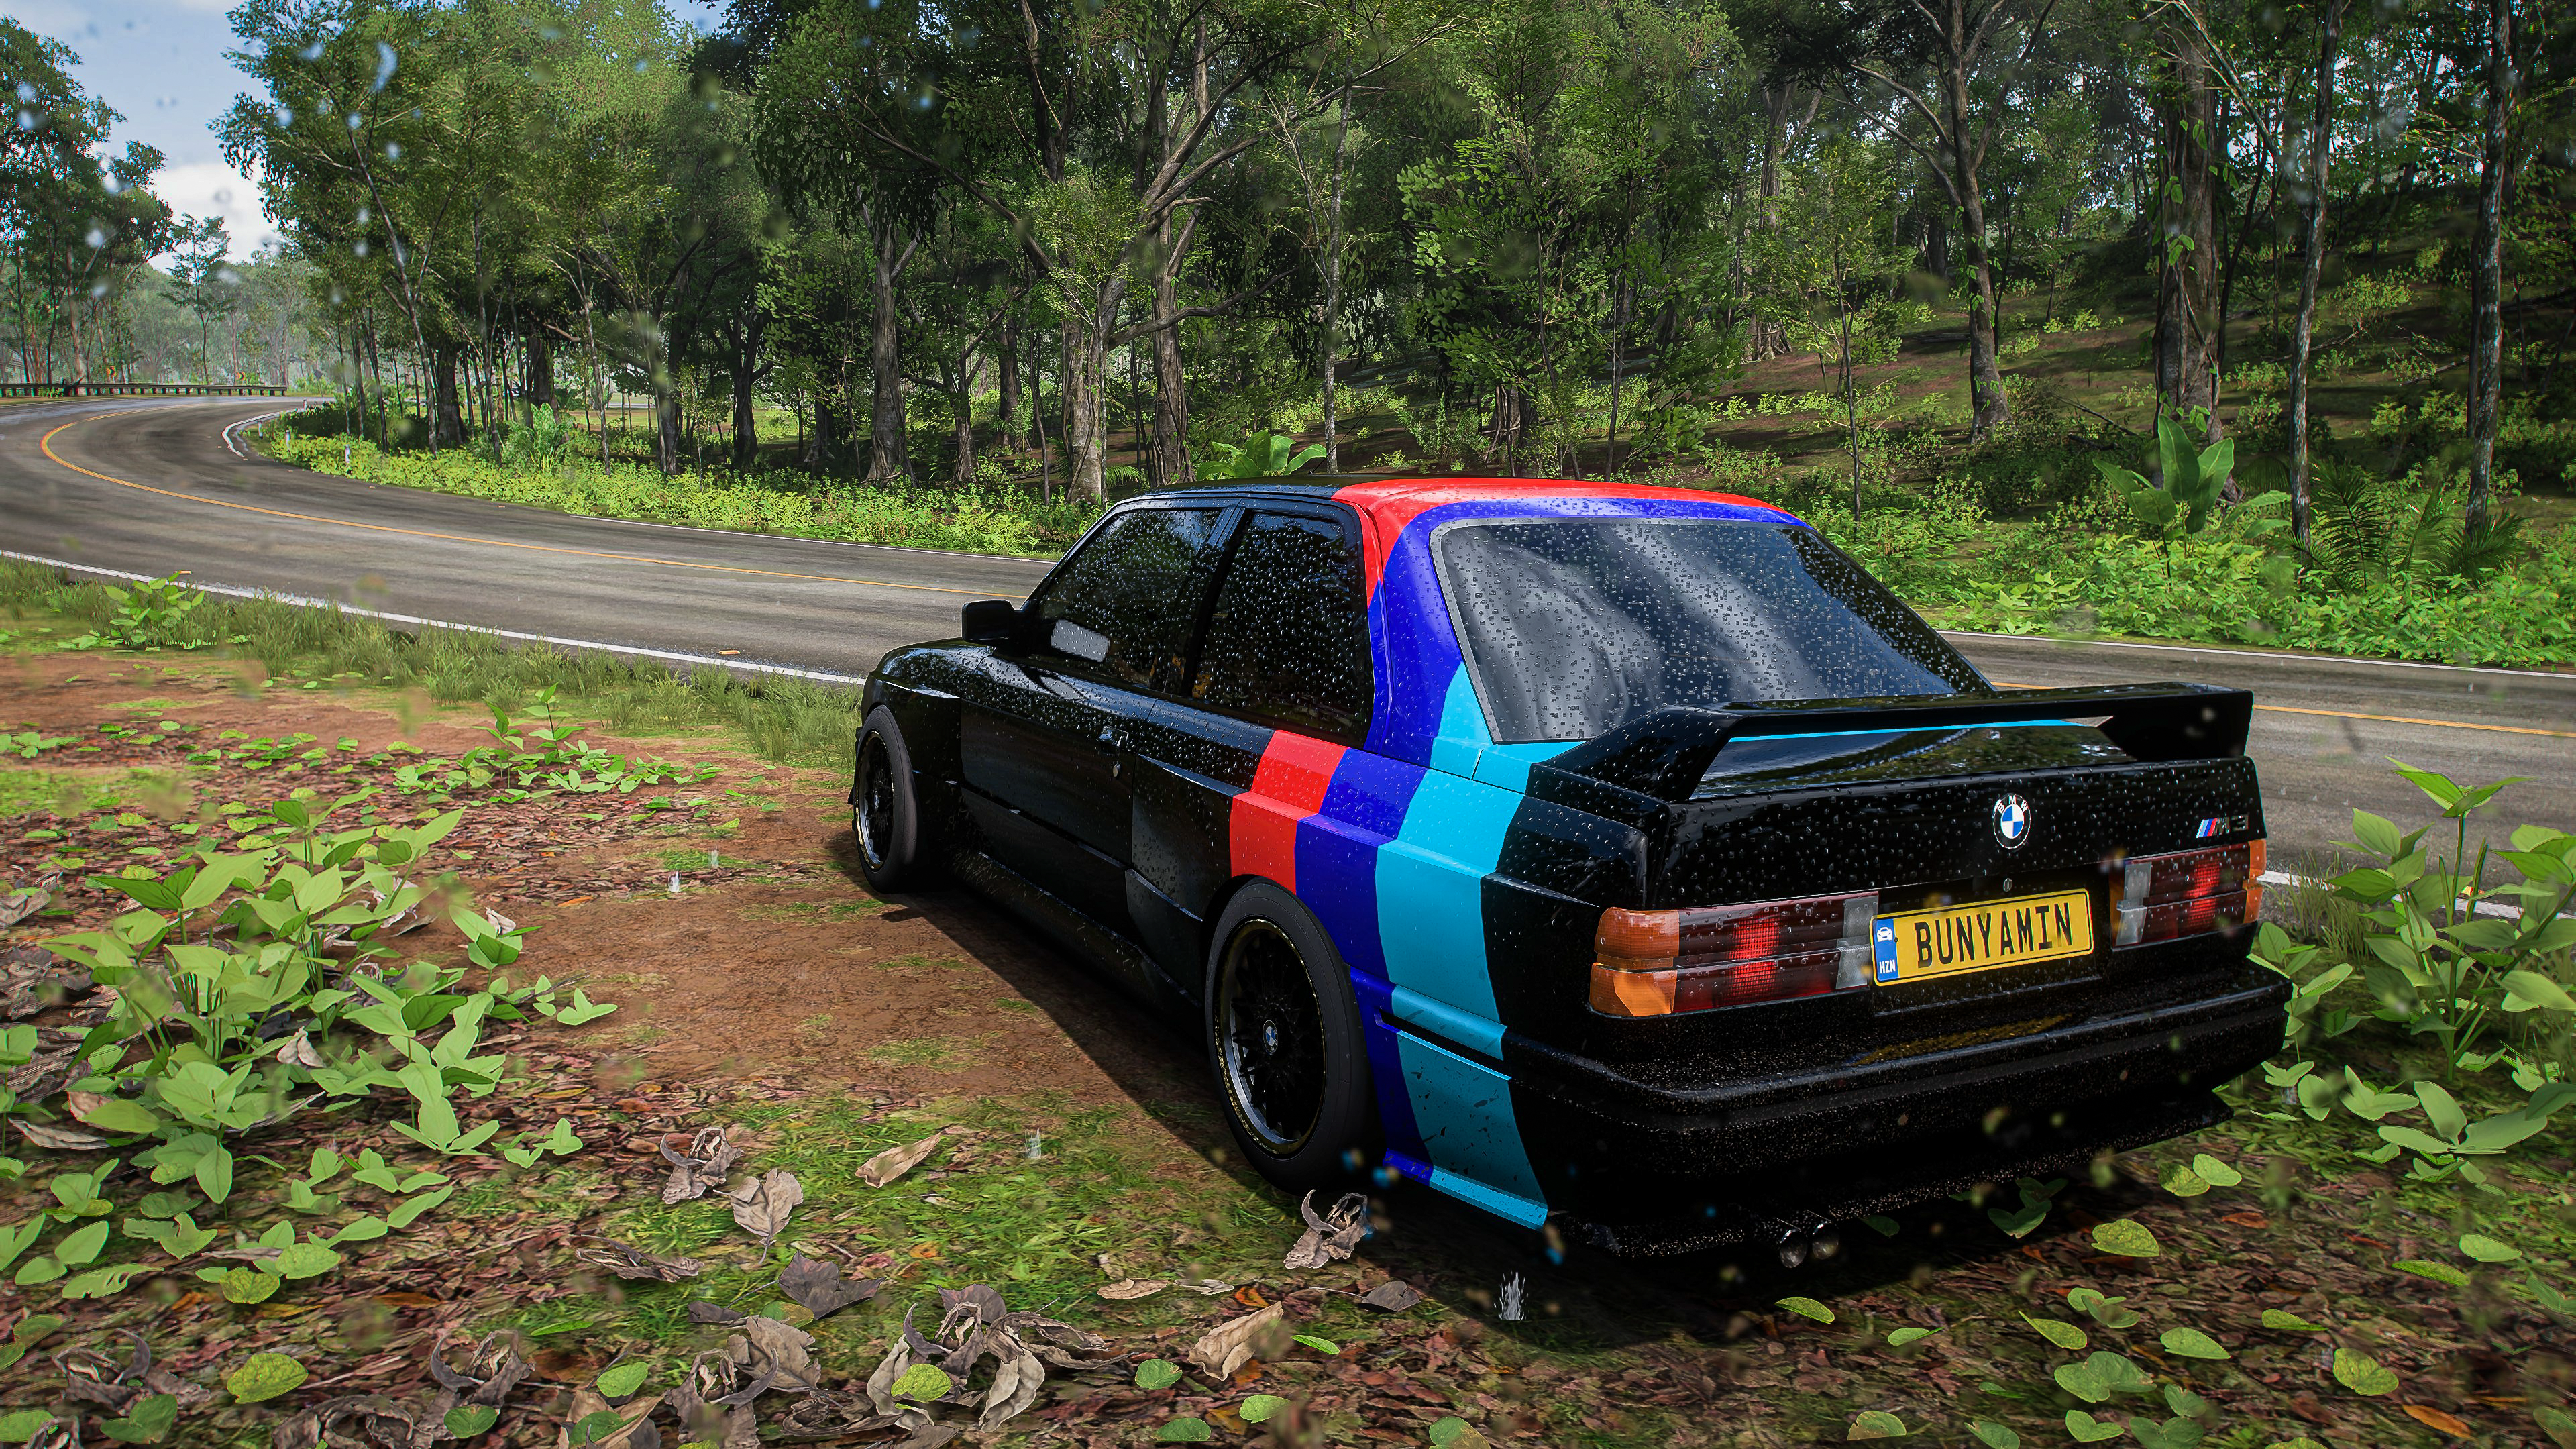 General 3840x2160 Forza Horizon 5 Forza Forza Horizon BMW BMW M3  jungle forest video games video game art vehicle car old car CGI trees road licence plates taillights German cars PlaygroundGames